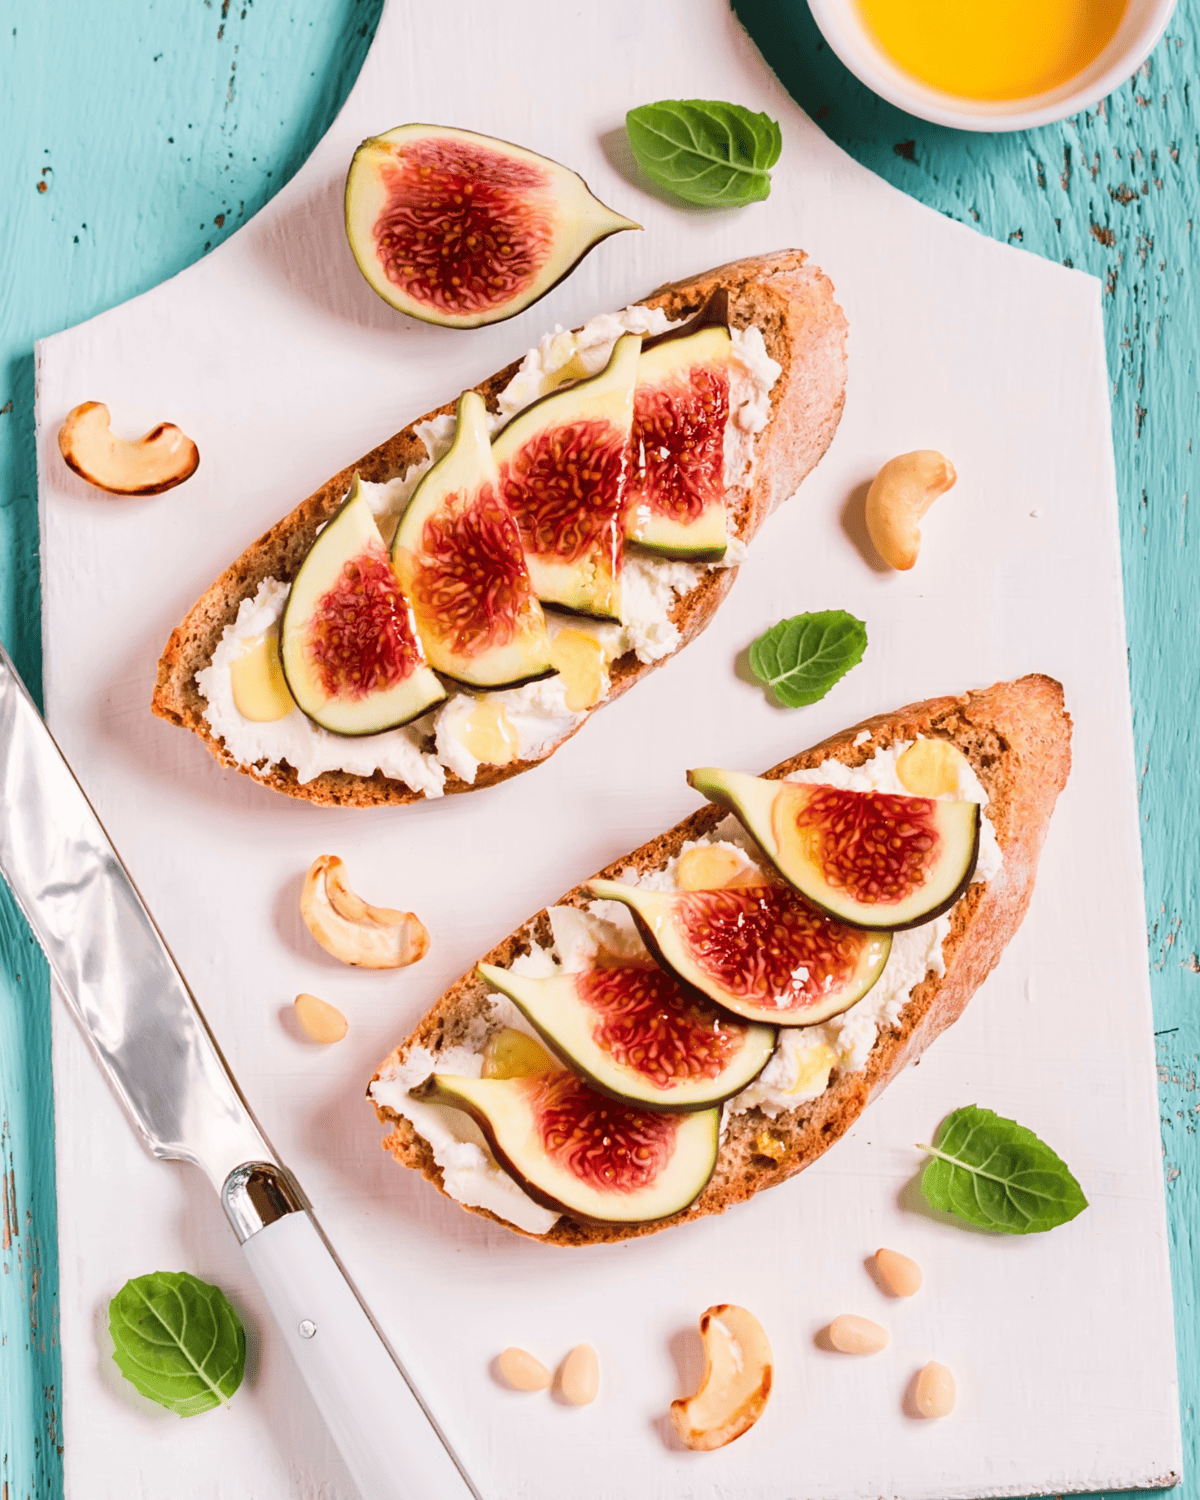 toasted sourghbread slice with whipped cheese, figs, and honey.